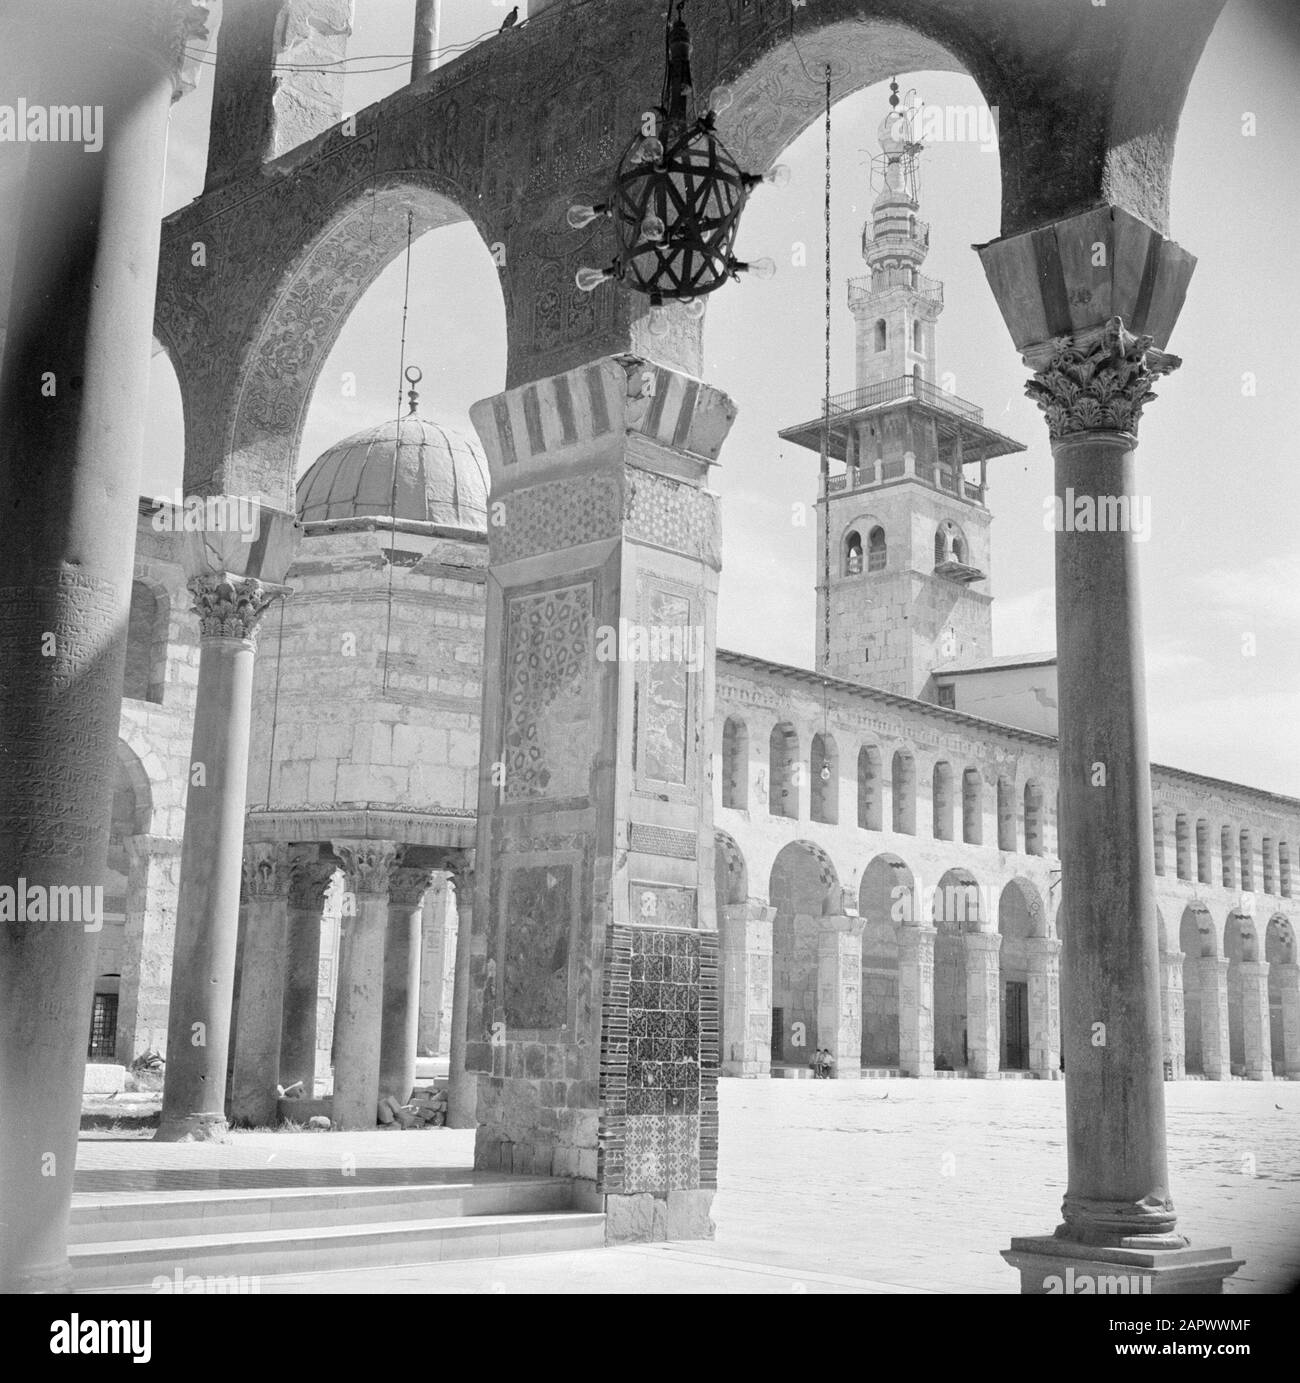 Middle East 1950-1955: Syria - Damascus  Omayad mosque, the north side of the forecourt with a minaret and fountain Date: 1950 Location: Damascus, Syria Keywords: fountains, minarets, mosques, columns Institution name: Omayyade Mosque Stock Photo